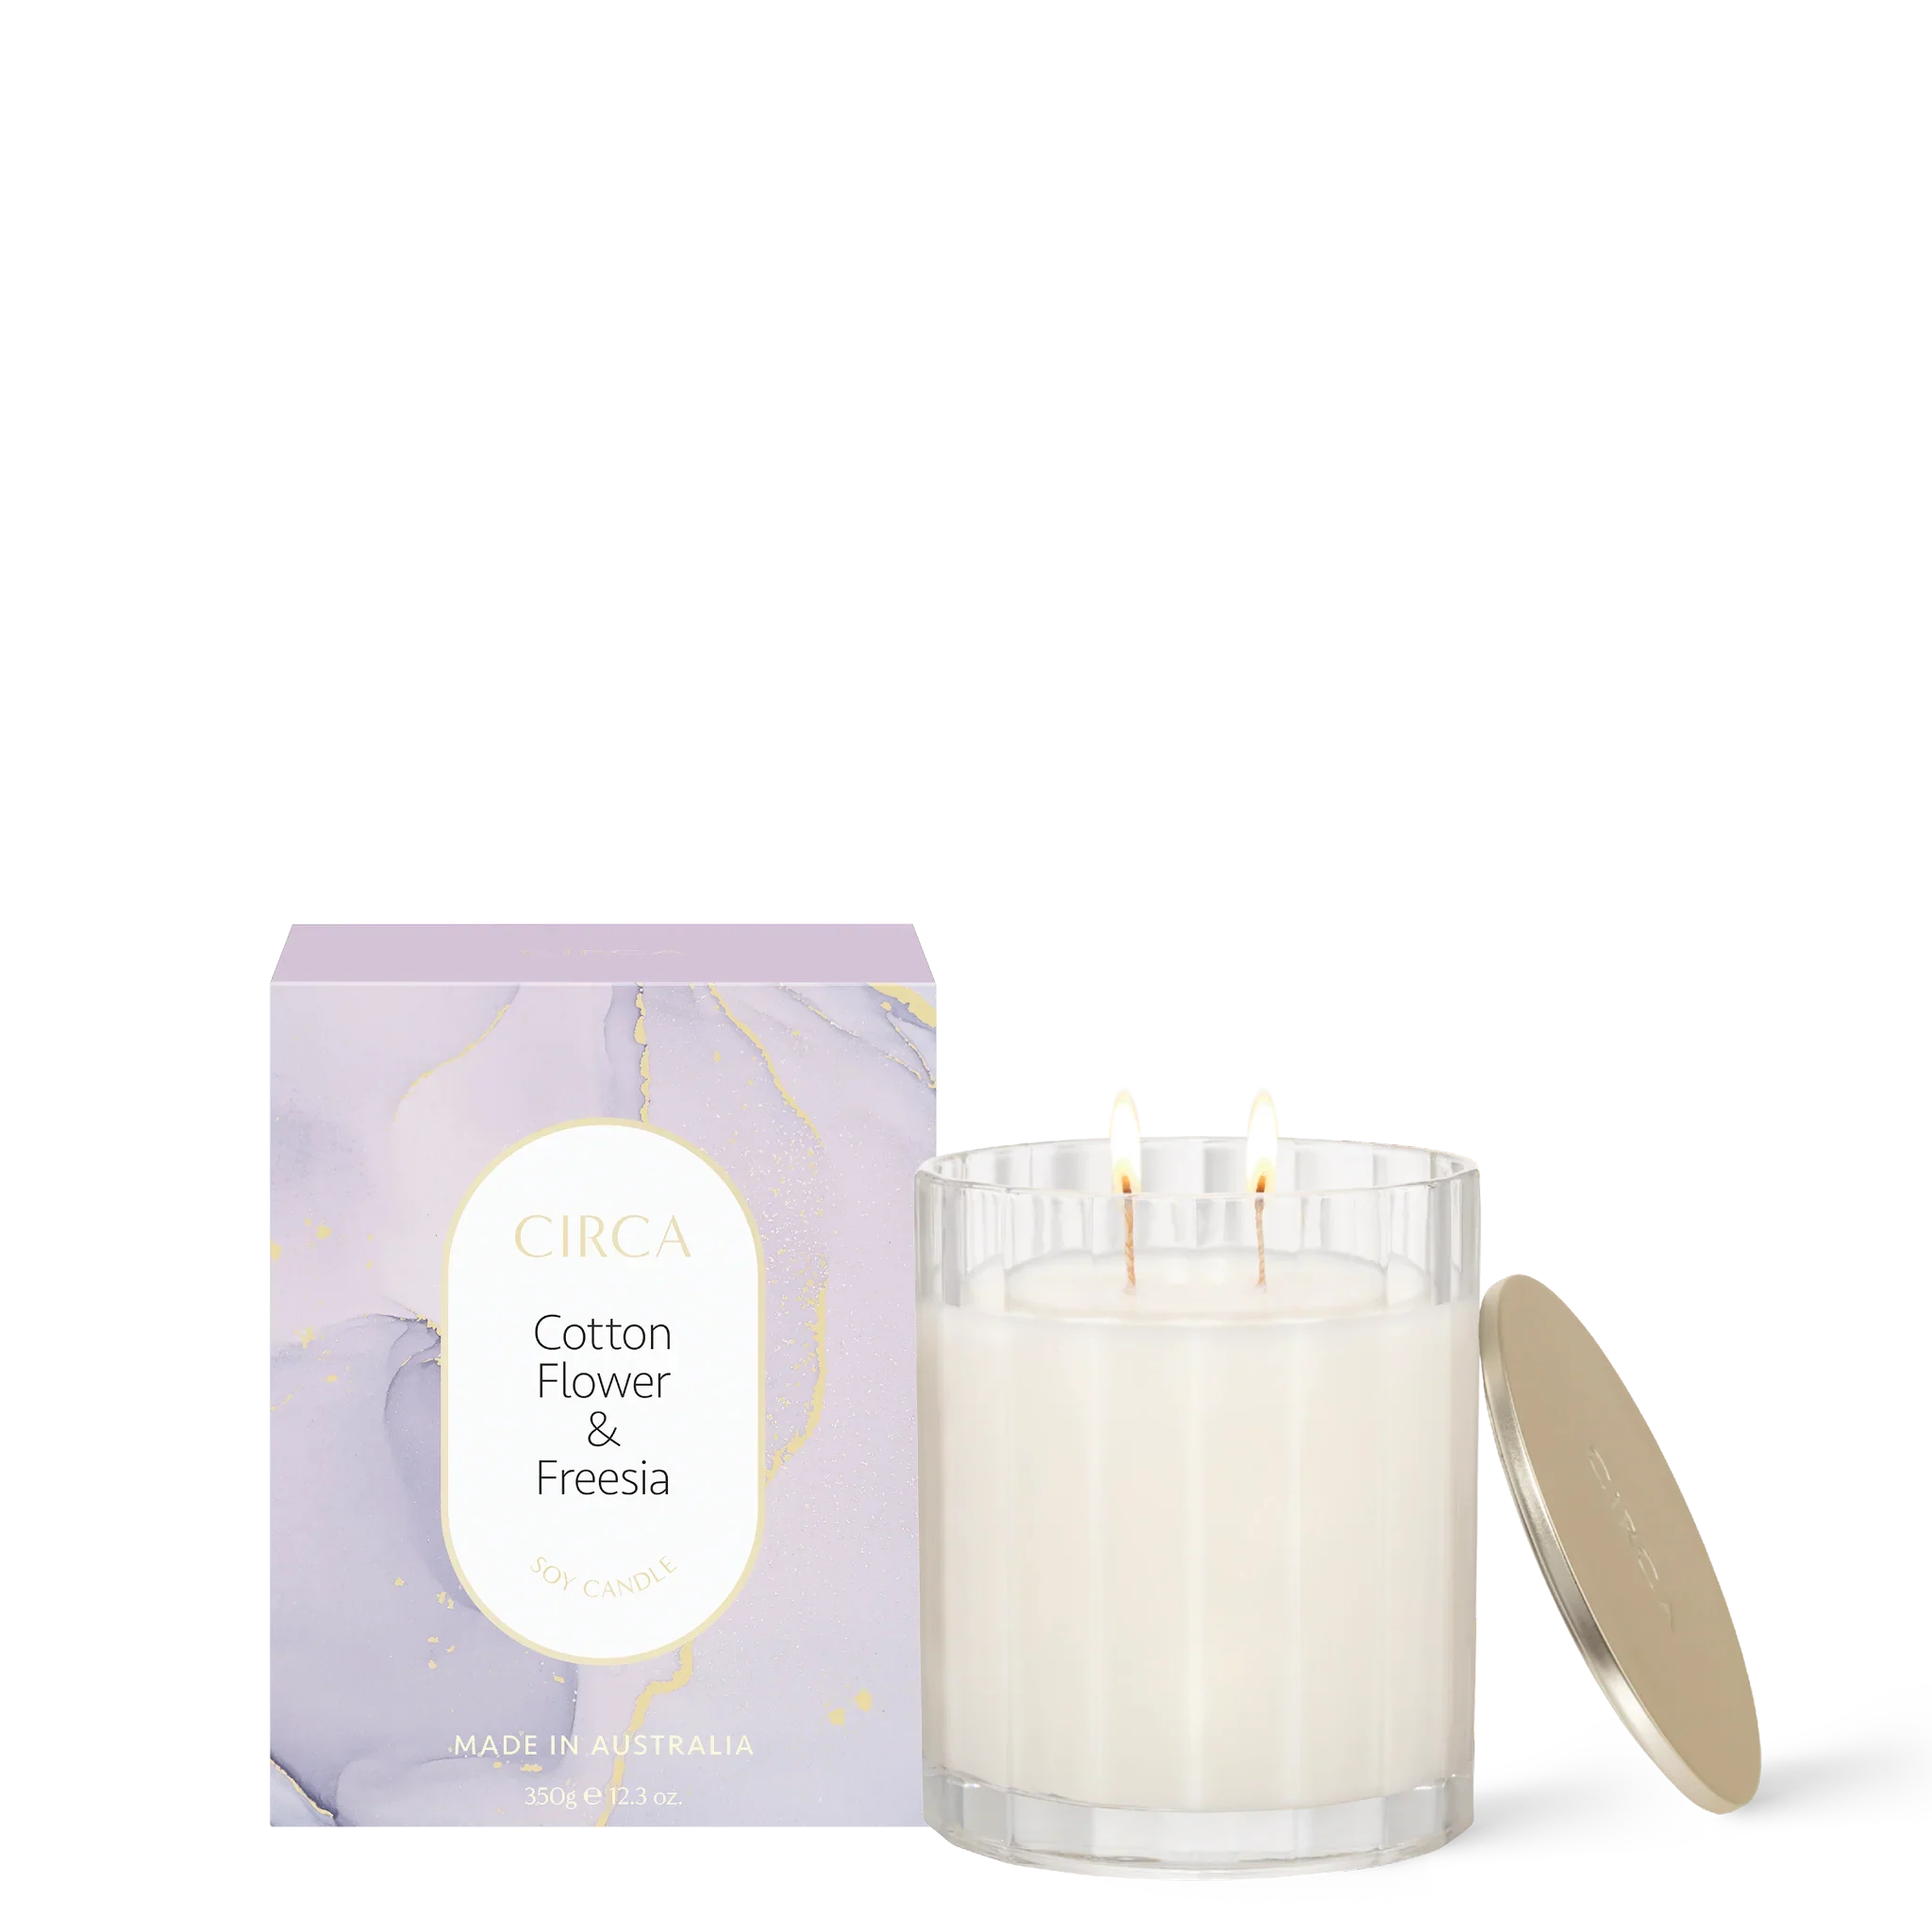 Cotton Flower & Freesia Soy Candle 350g